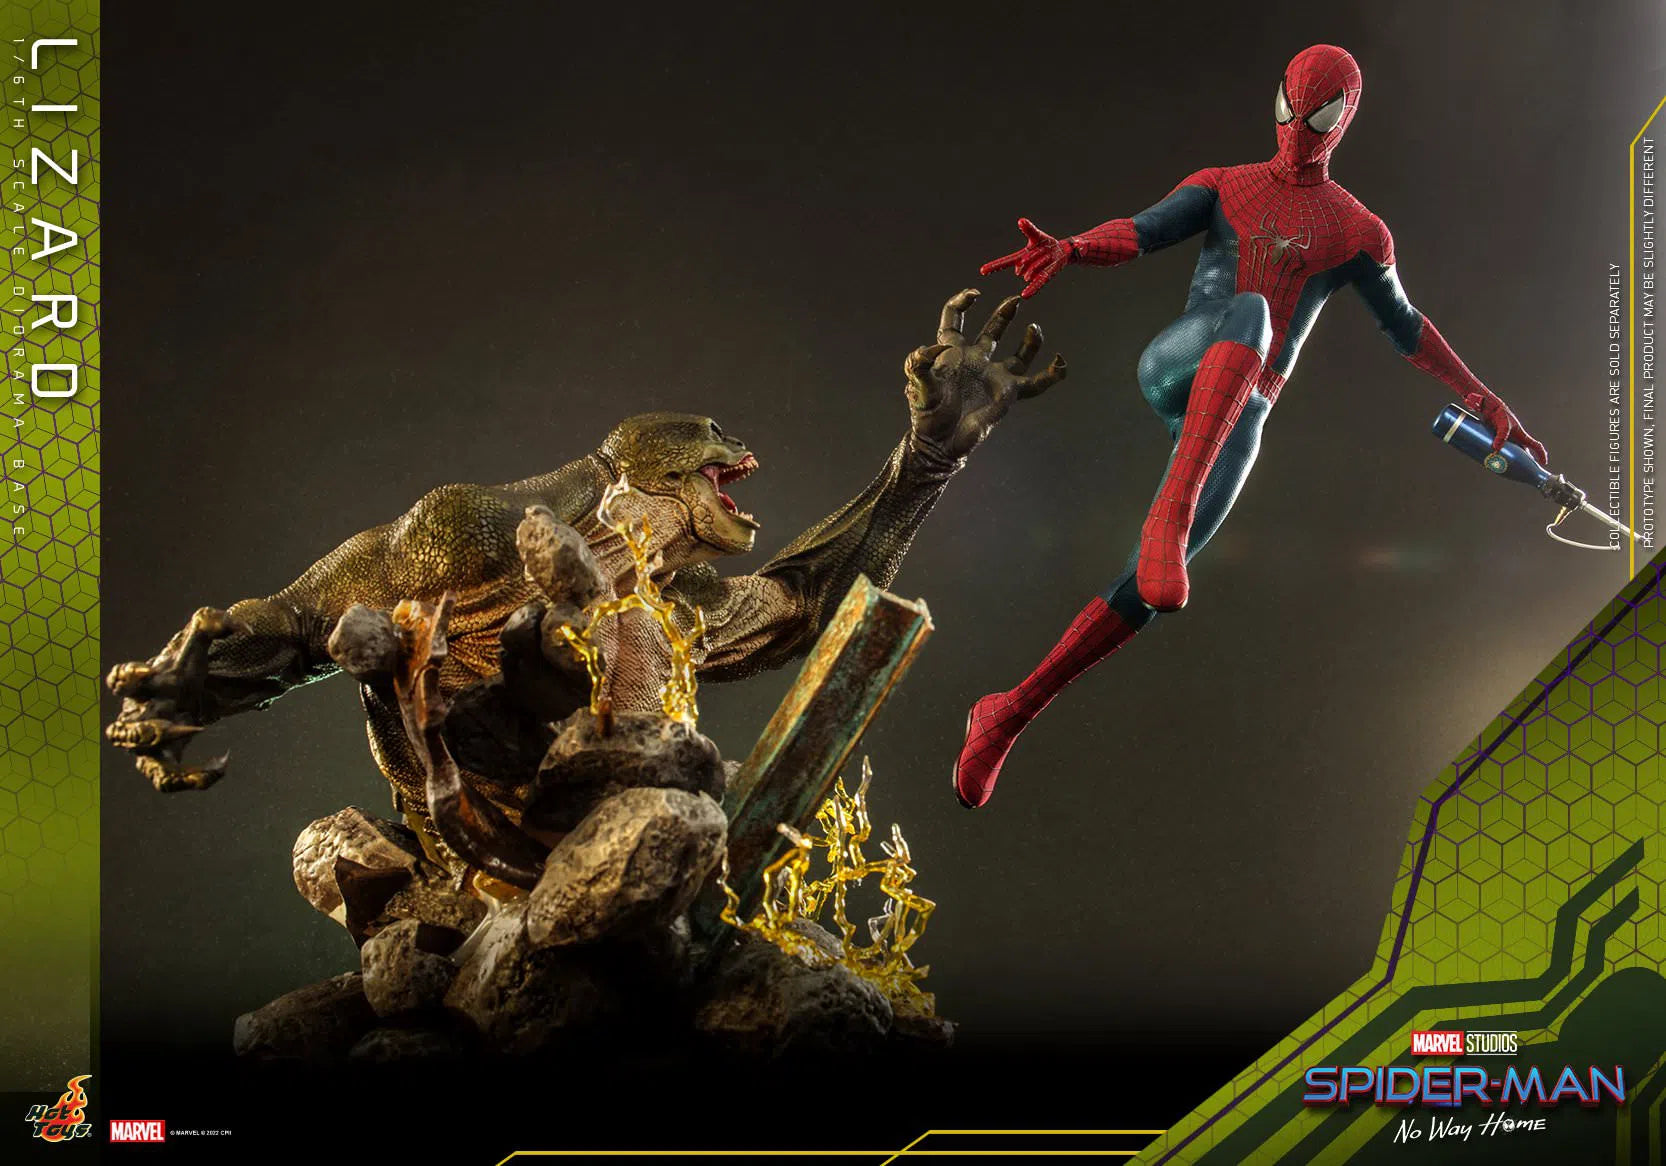 Spider-Man: With Lizard: The Amazing Spider-Man 2: Hot Toys